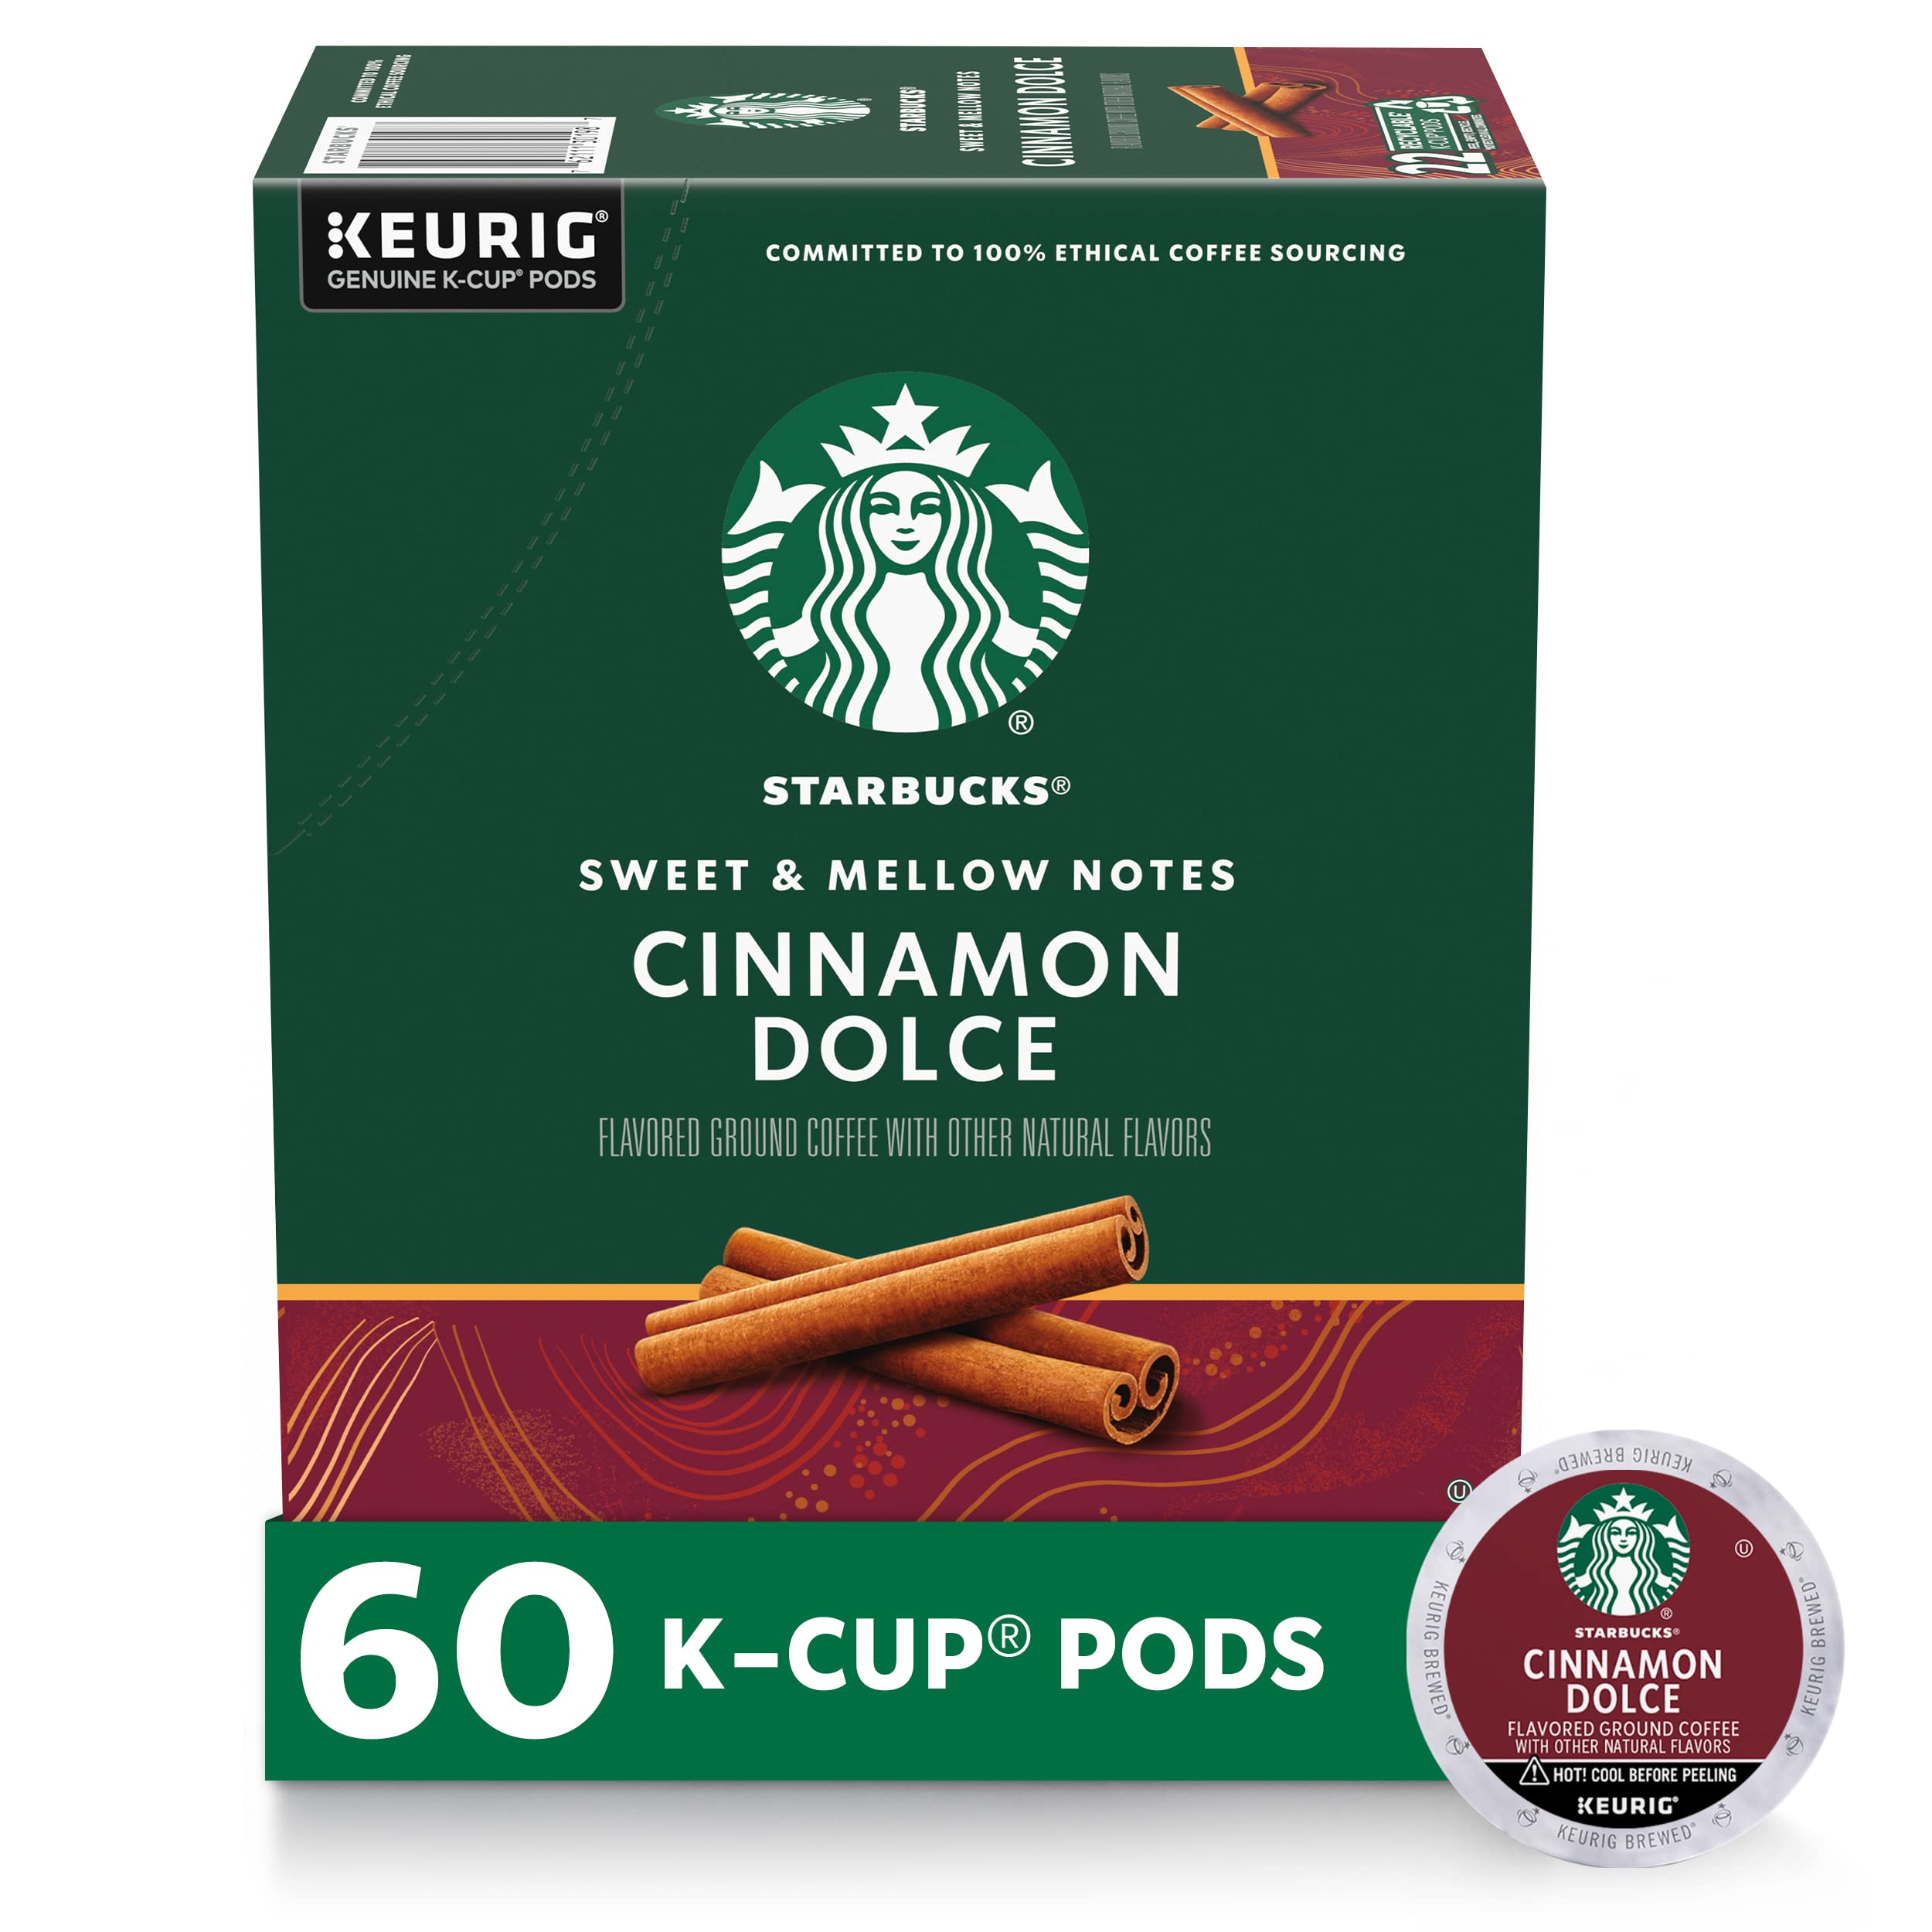 Starbucks K-Cup Coffee Pods, Cinnamon Dolce Flavored Coffee for Keurig Brewers, Naturally Flavored, 100% Arabica, 6 boxes (60 pods total)